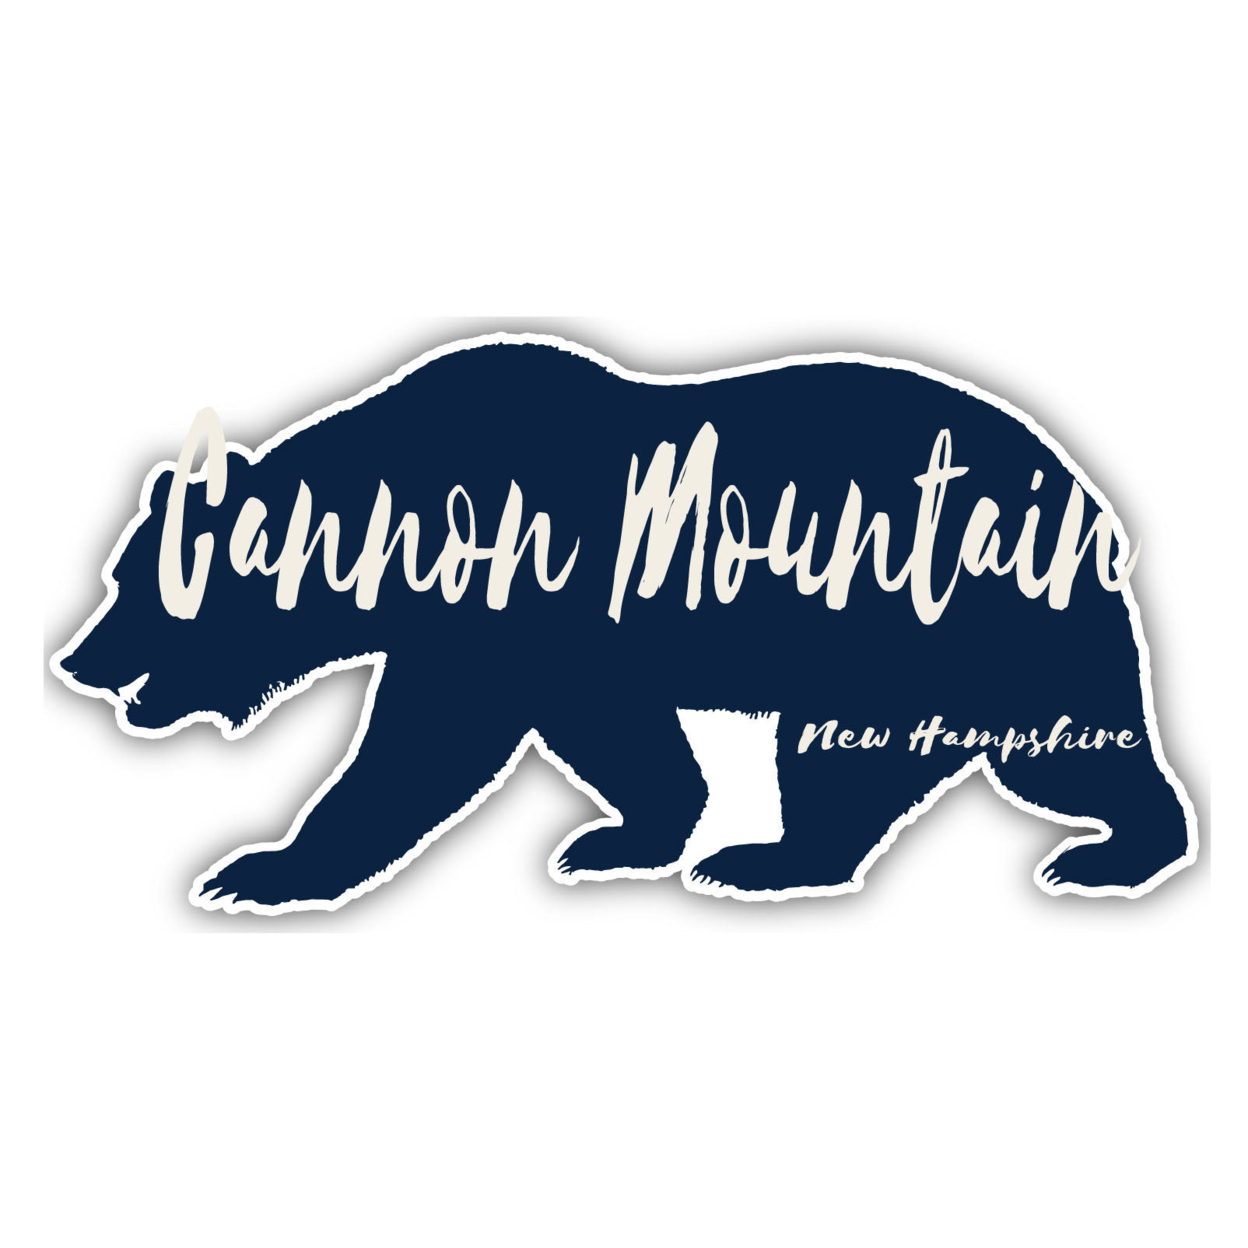 Cannon Mountain New Hampshire Souvenir Decorative Stickers (Choose Theme And Size) - 4-Pack, 8-Inch, Bear